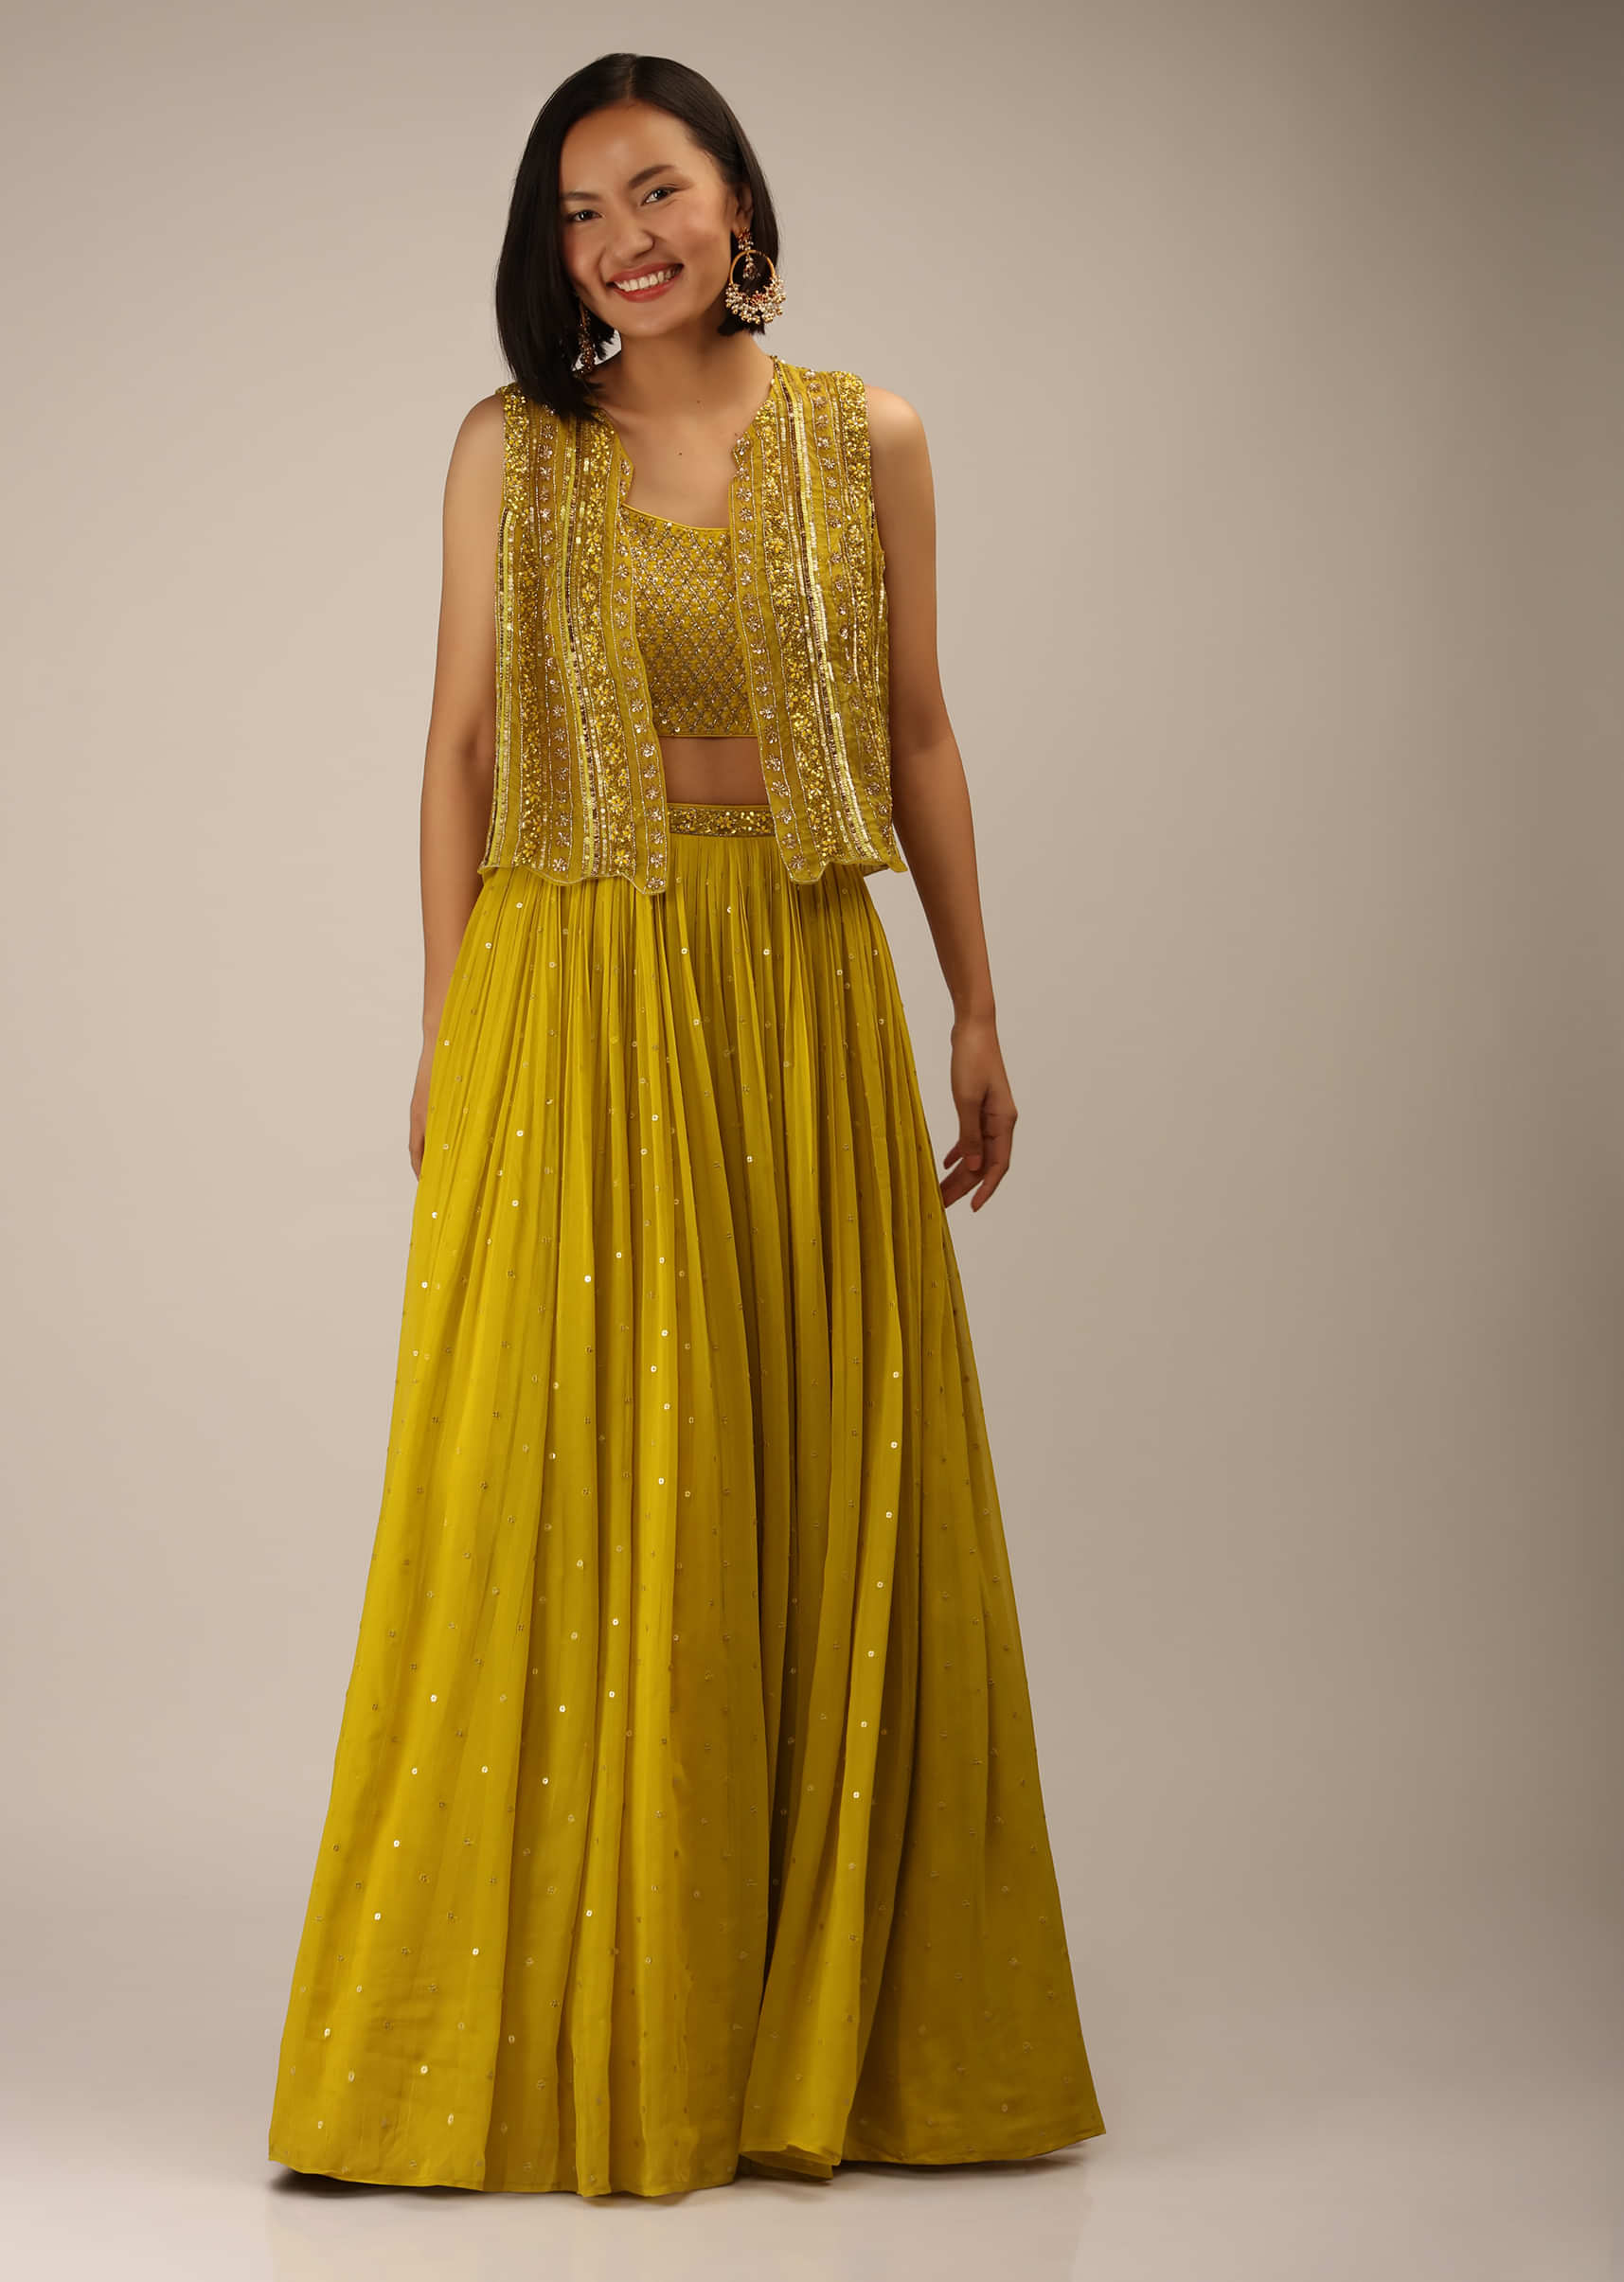 Sulphur Yellow Lehenga In Georgette With Cut Dana Embroidered Crop Top And Cropped Jacket